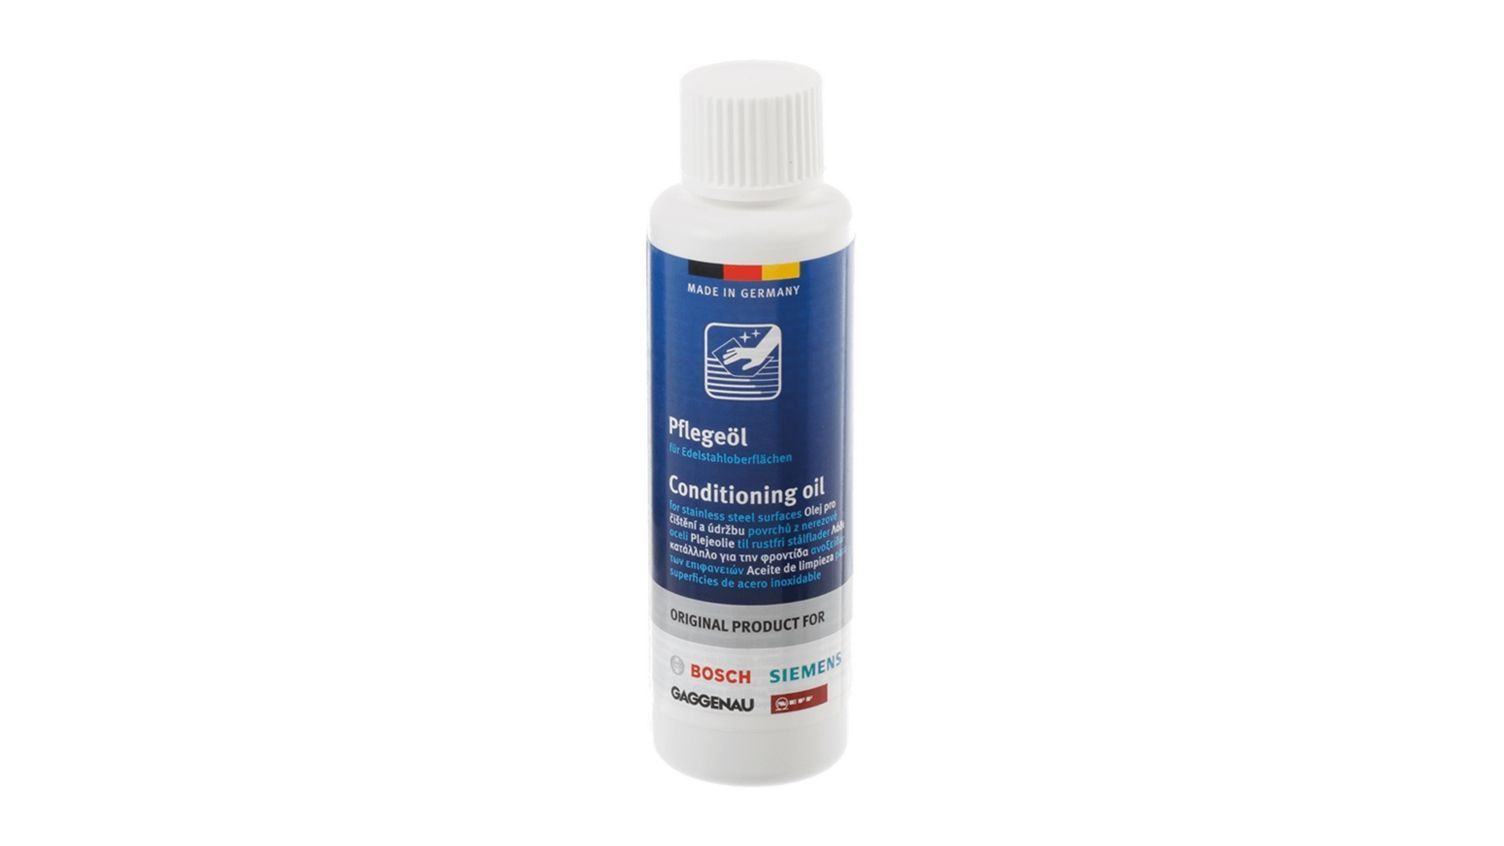 Cleaning Agent (Oil) for Bosch Siemens Stainless Steel Surfaces - 00311945 BSH